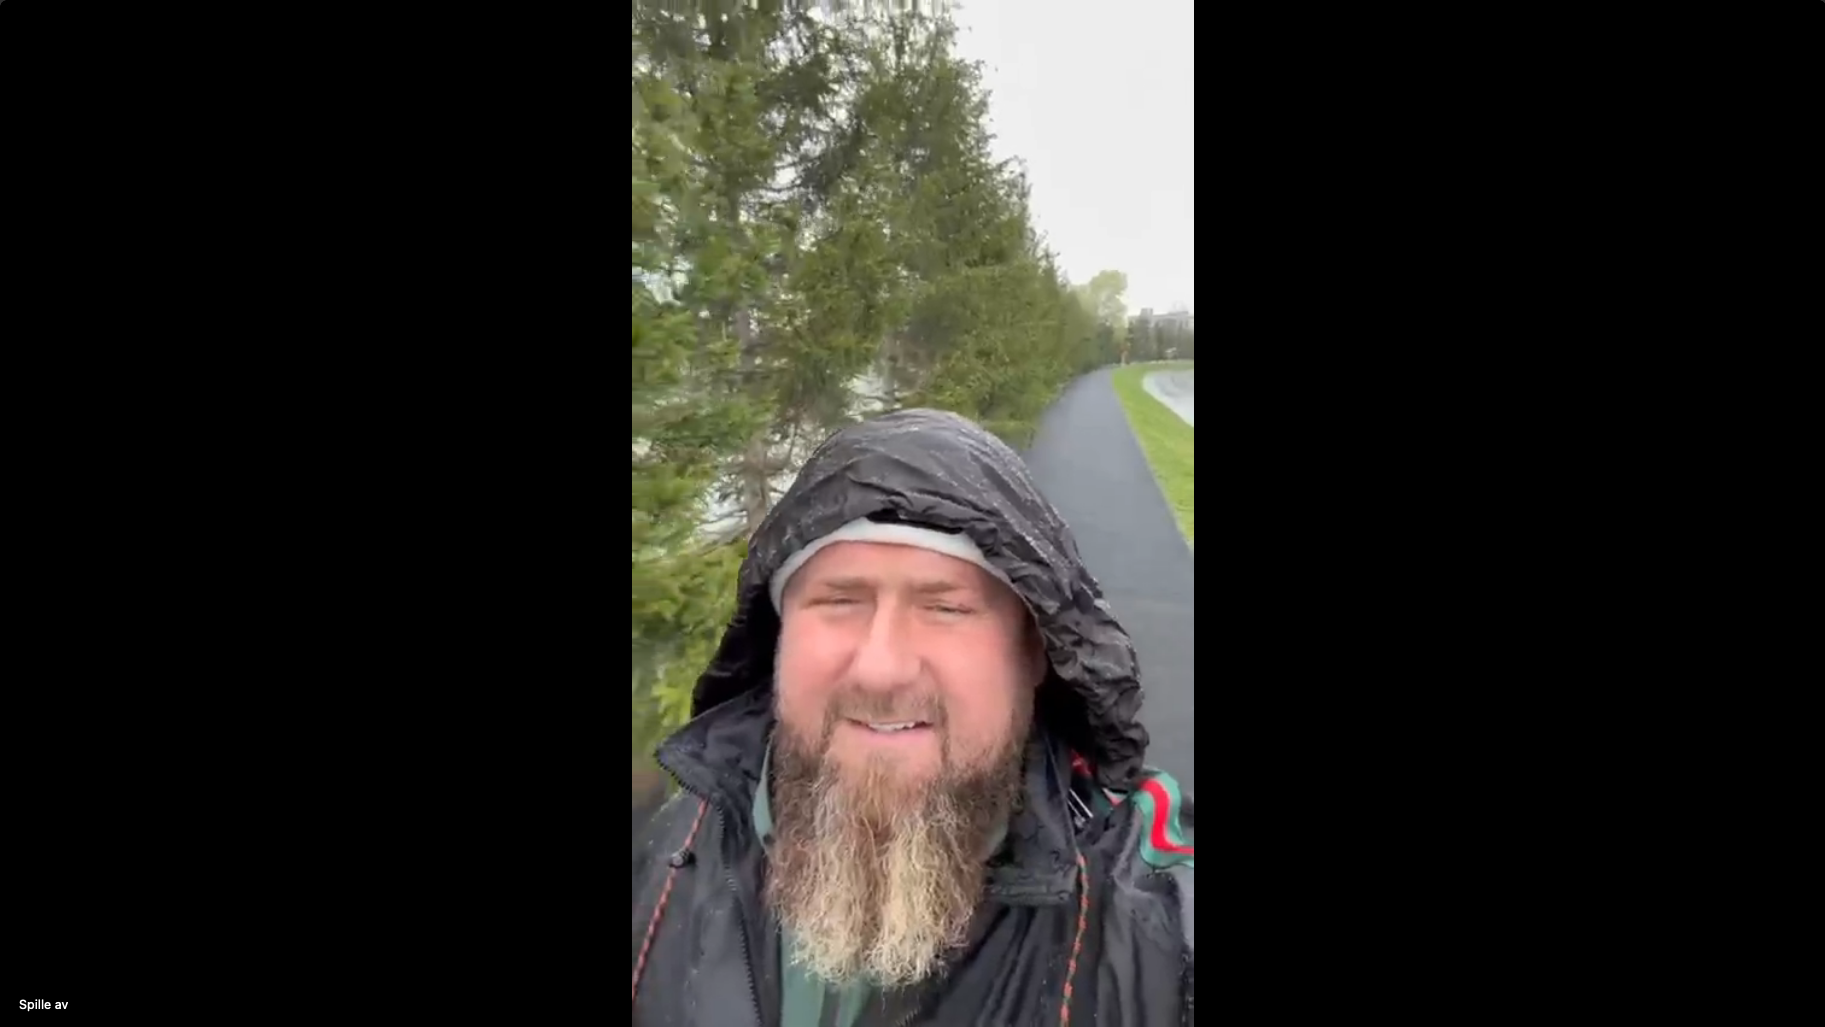 Ramzan Kadyrov posted a picture of himself walking, and wrote that he is healthy and fast.